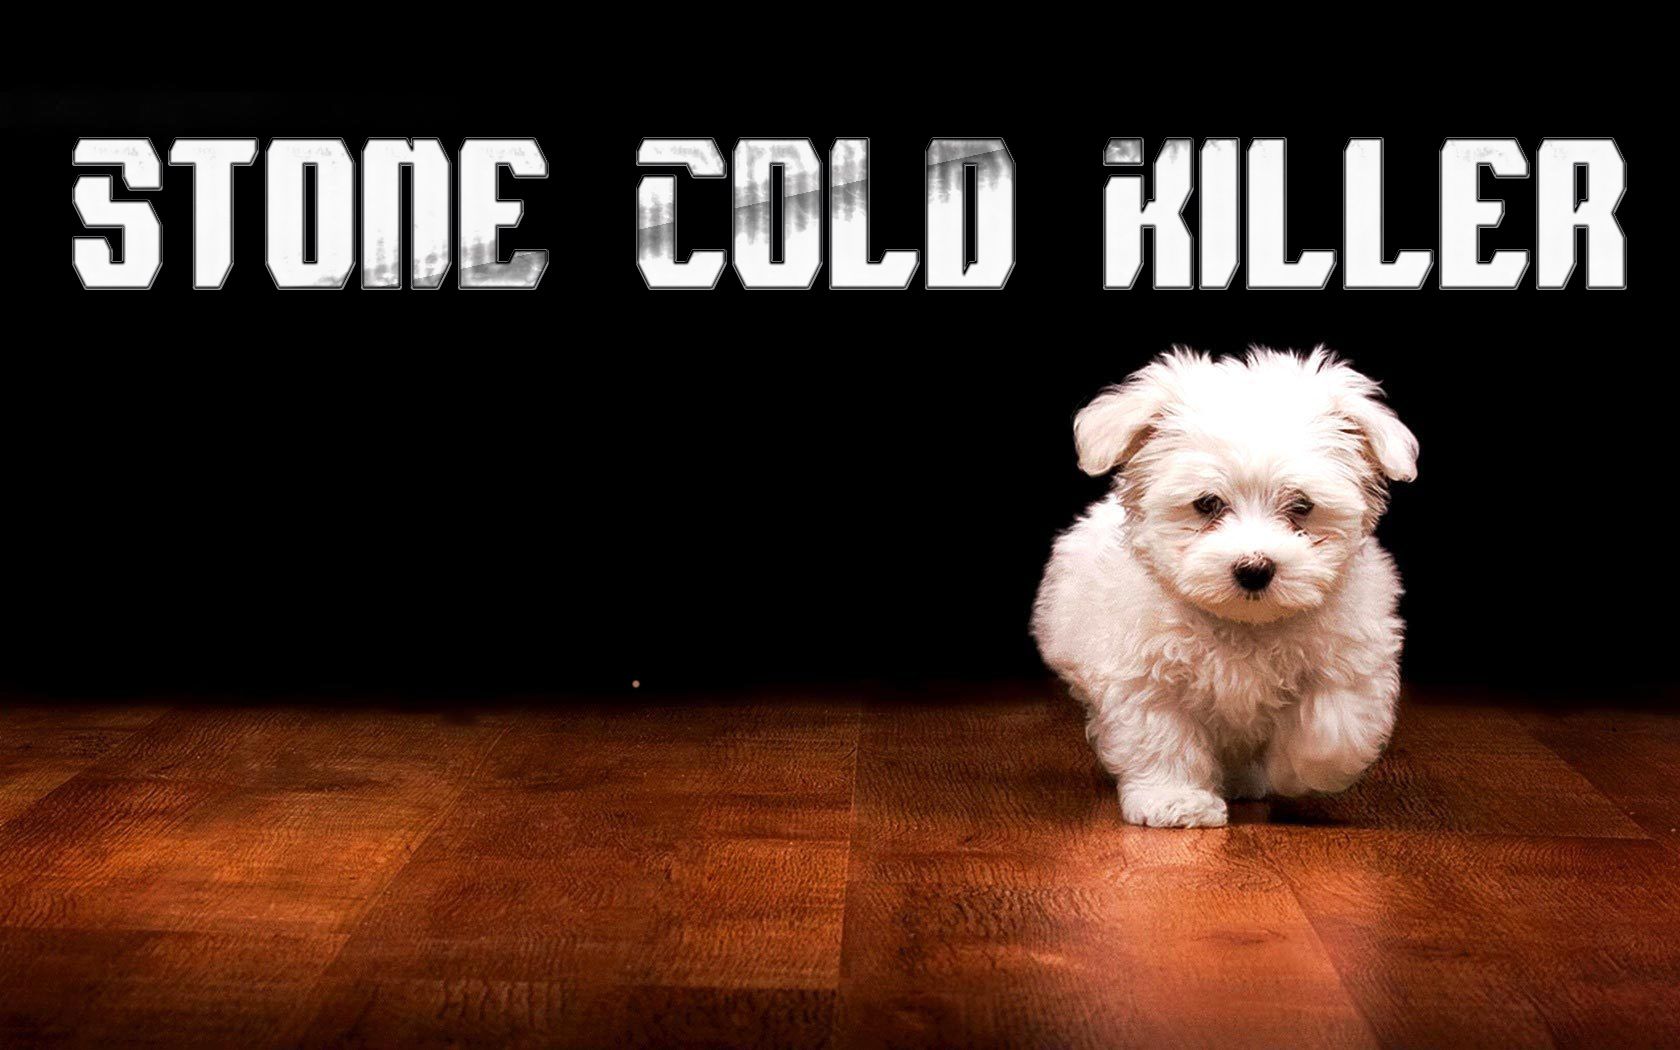 Dog Killer Humor Funny Puppy Puppies Cute Sadic Dogs Animal Meme Background Wallpaper & Background Download